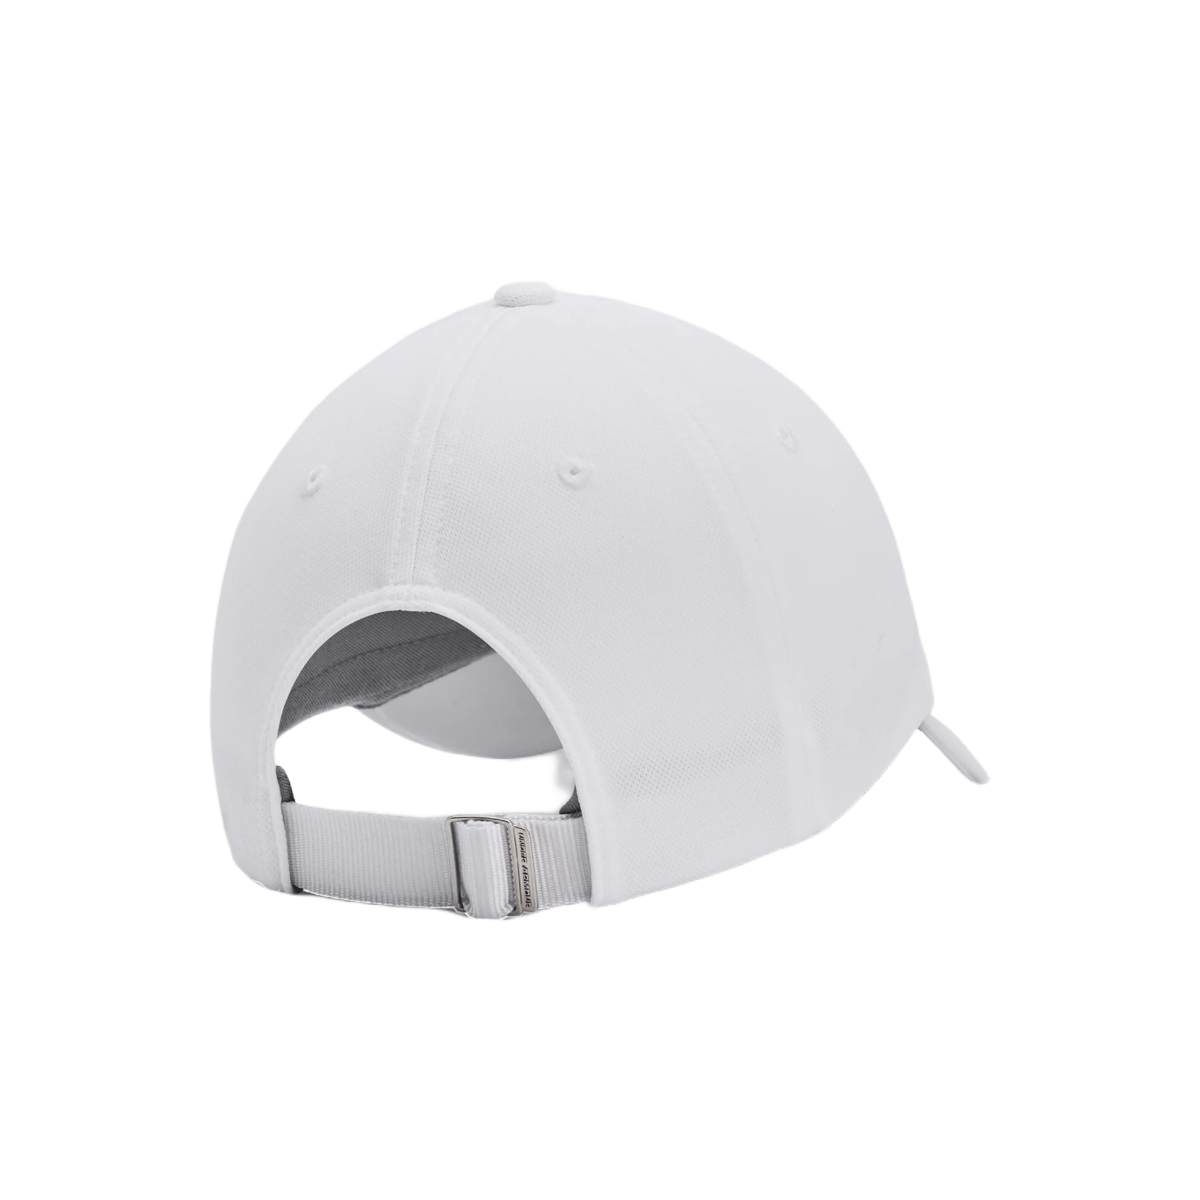 Under Armour Blitzing Adjustable Cap - Women's - Al's Sporting Goods: Your  One-Stop Shop for Outdoor Sports Gear & Apparel